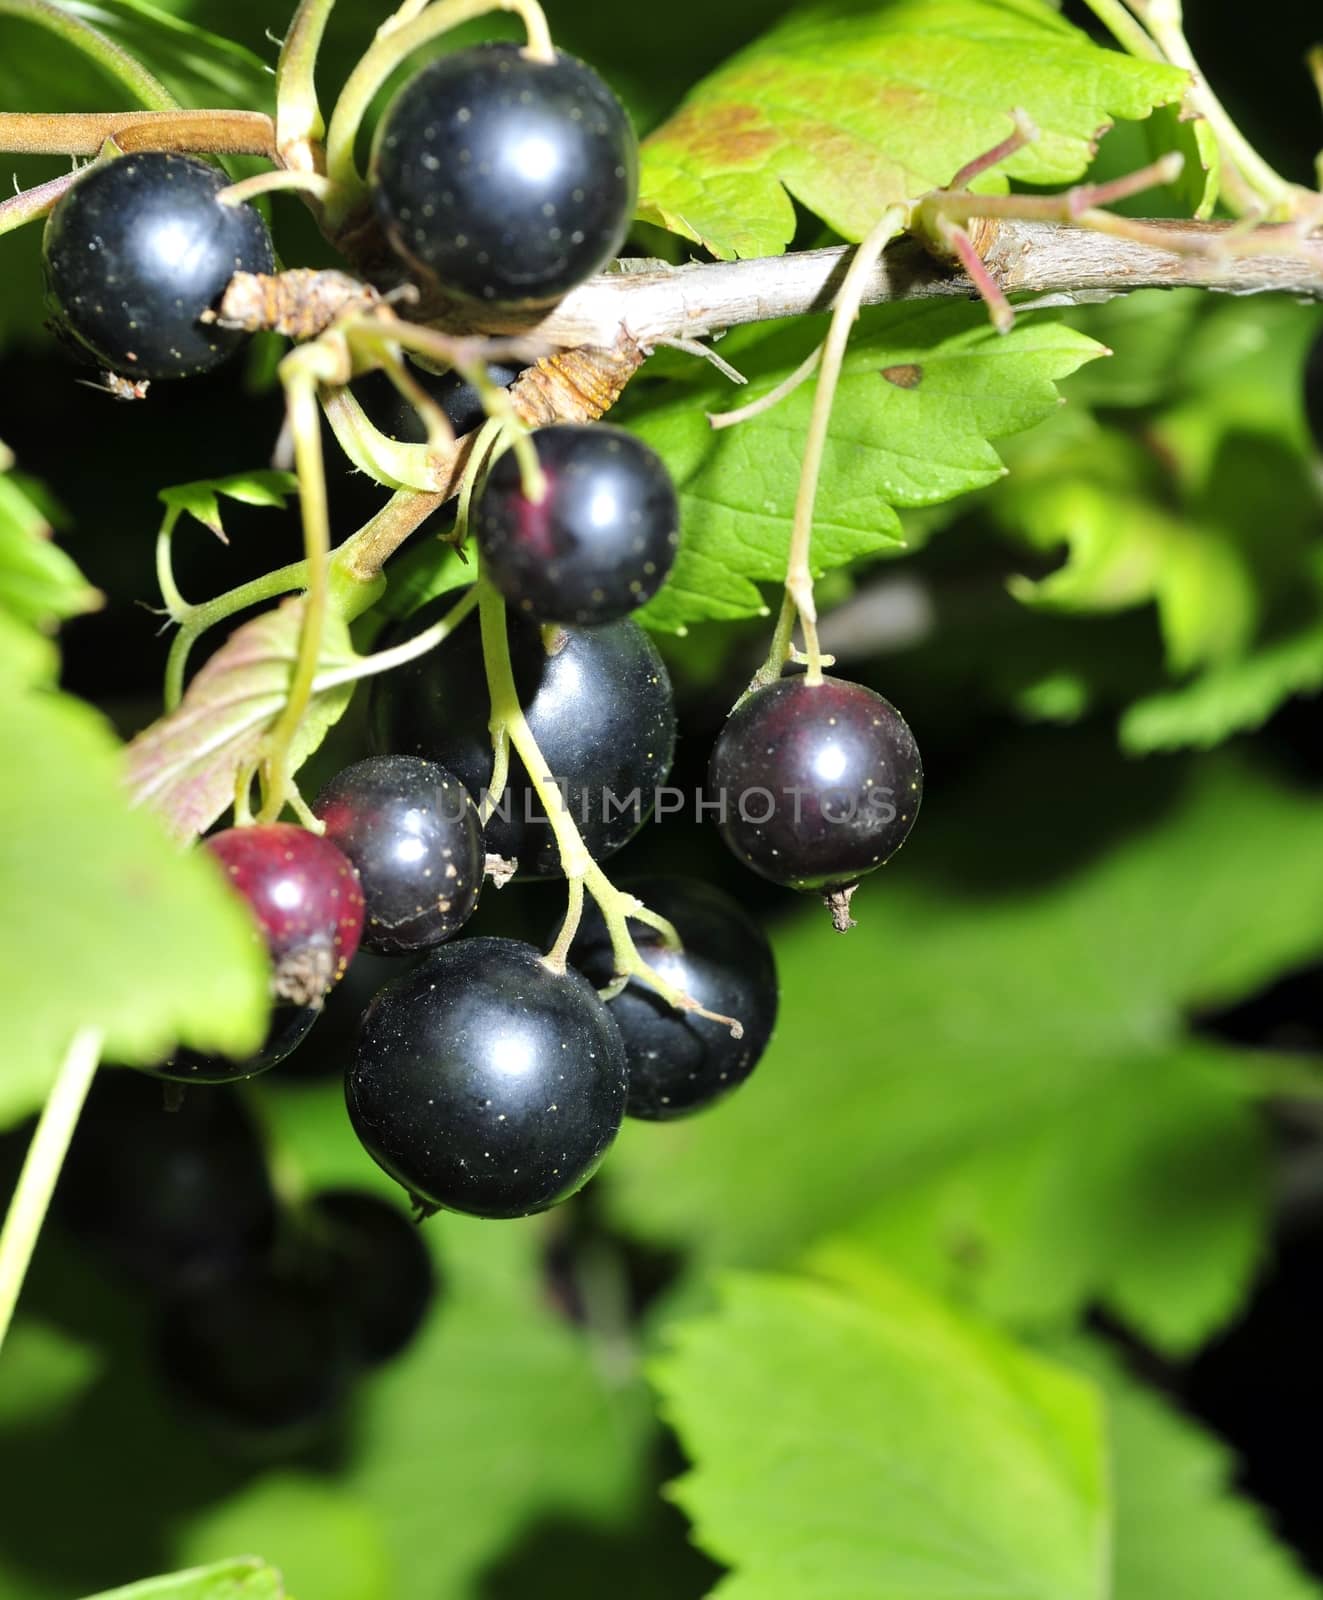 black currant on a branch in the garden by valerypetr